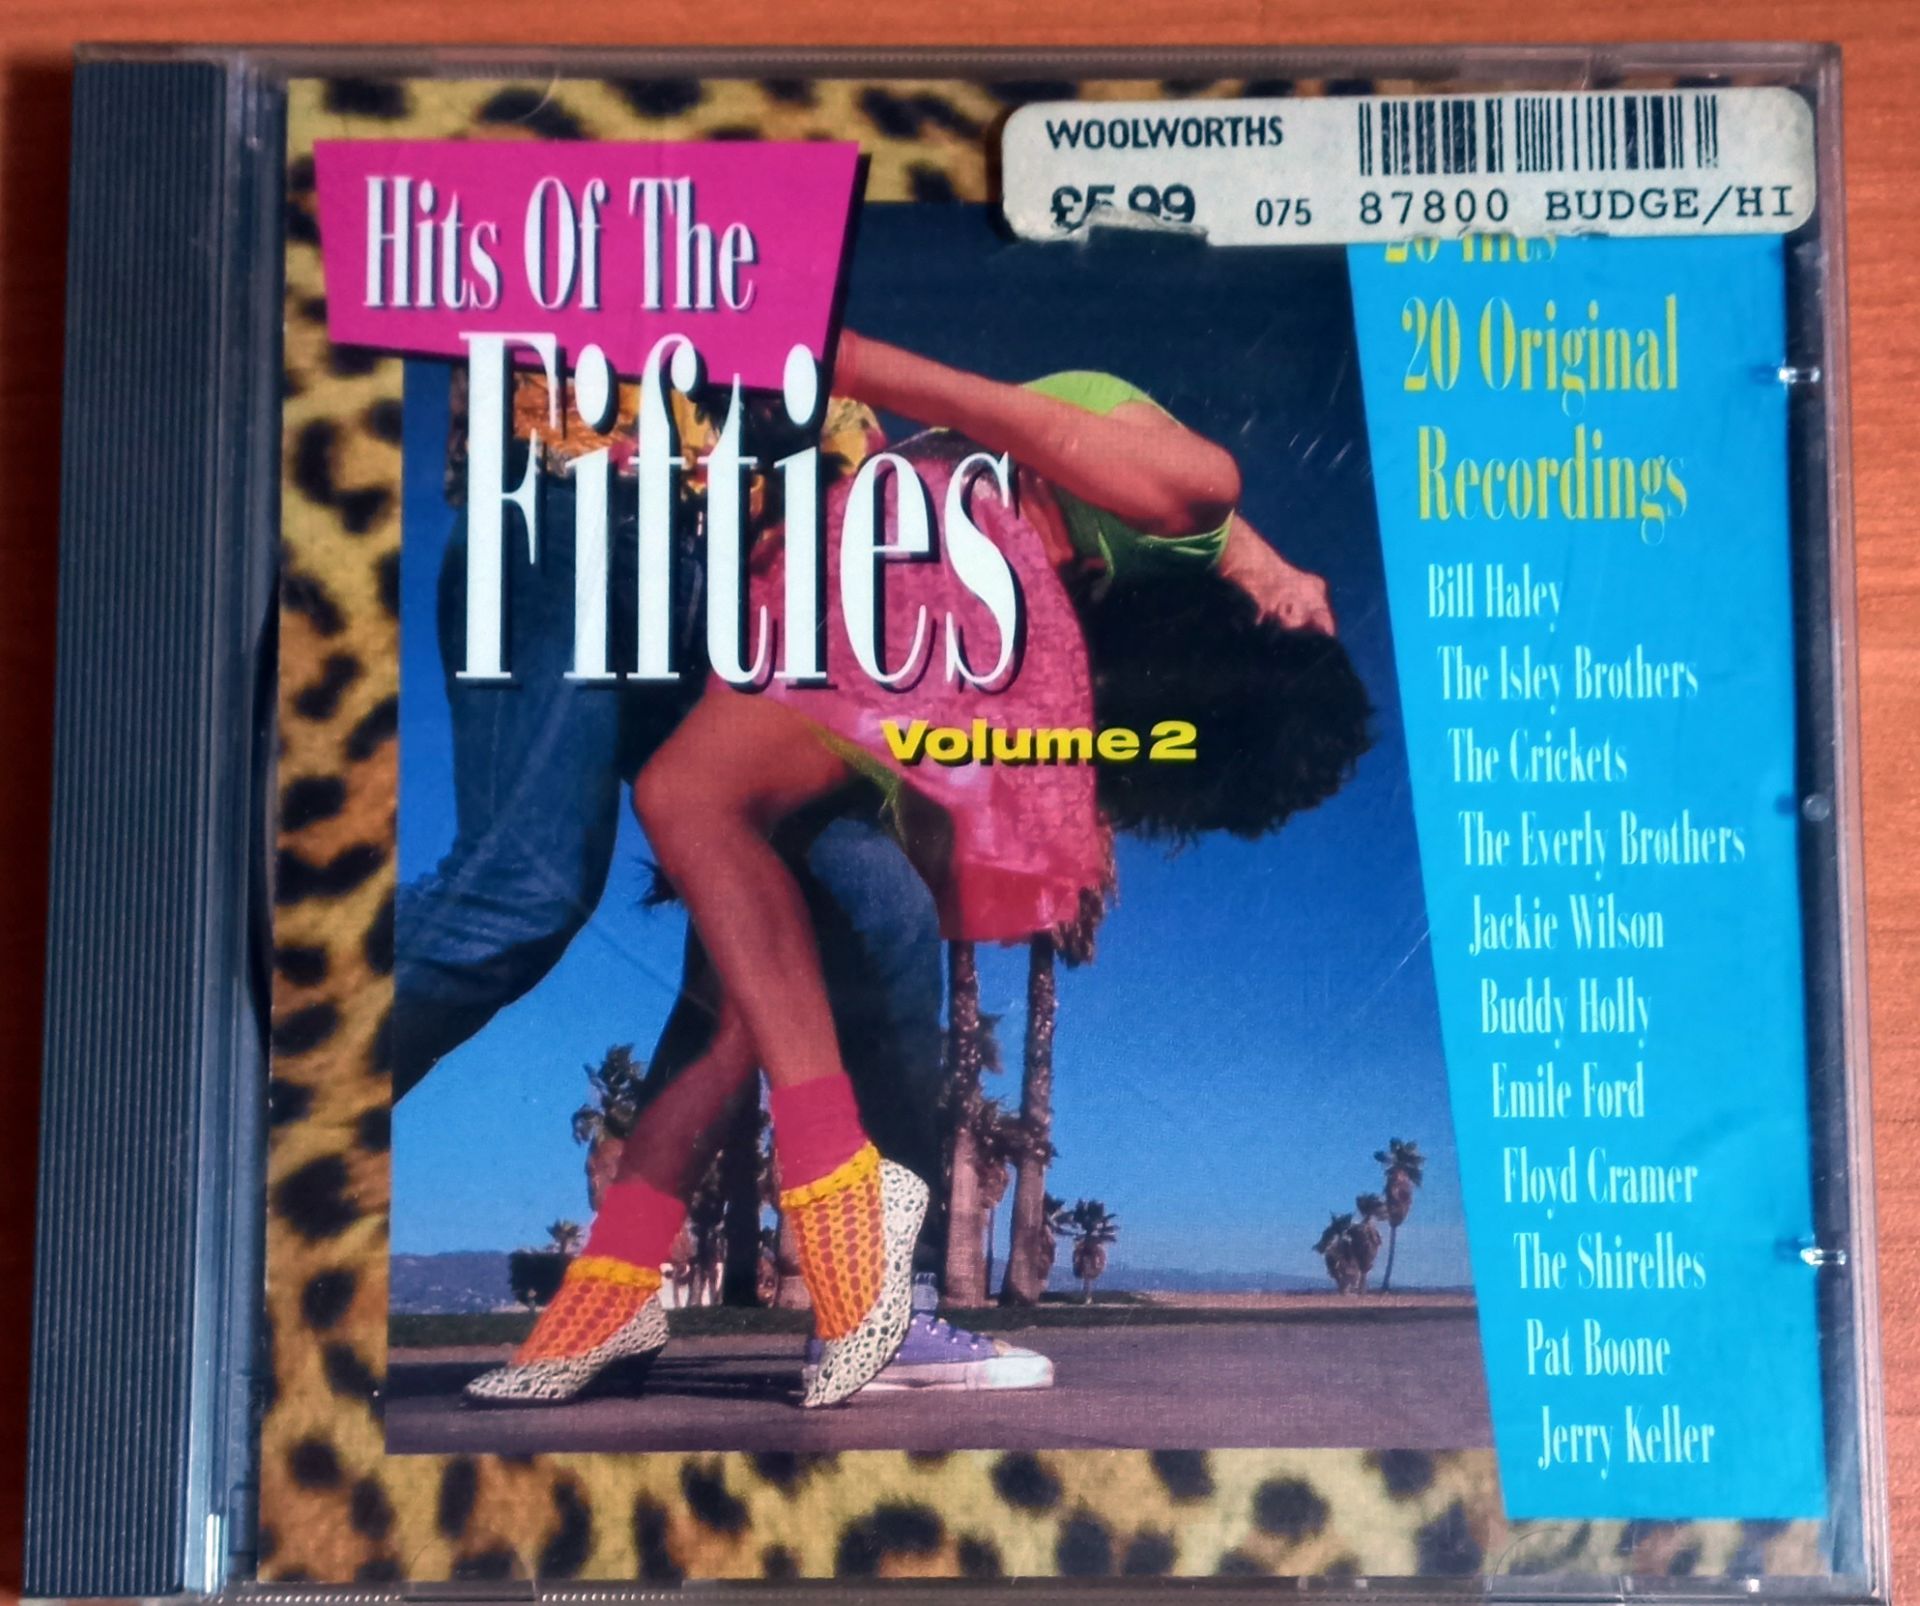 HITS OF THE FIFTIES VOLUME 2 - V/A BILL HALEY EVERLY BROTHERS BUDDY HOLLY PAT BOONE HARRY BELAFONTE etc (1994) - CD 2.EL